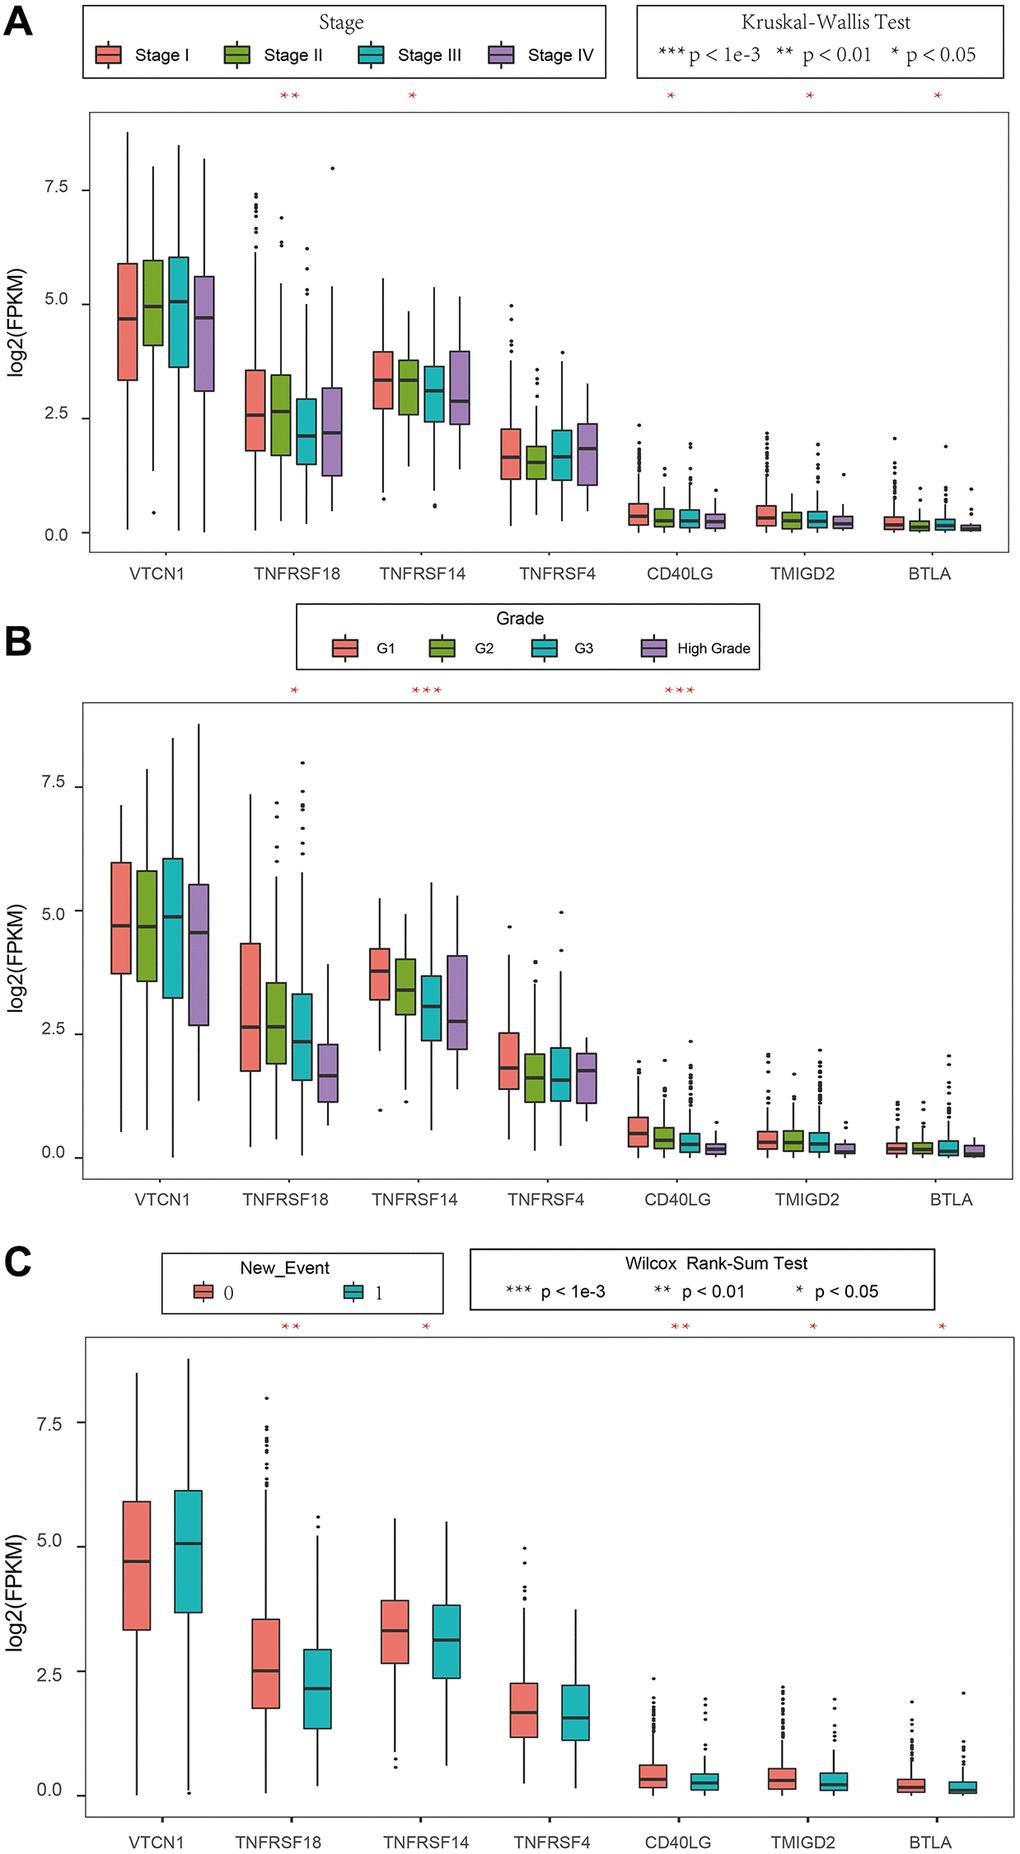 Association between ICGs and clinicopathological variables in EC. (A–C) Box plot shows expression values (FPKM) of seven prognostic ICGs in various (A) tumor stages, (B) tumor grades, and (C) new events of EC patients. The abscissa represents ICGs and ordinate represents their gene expression values.